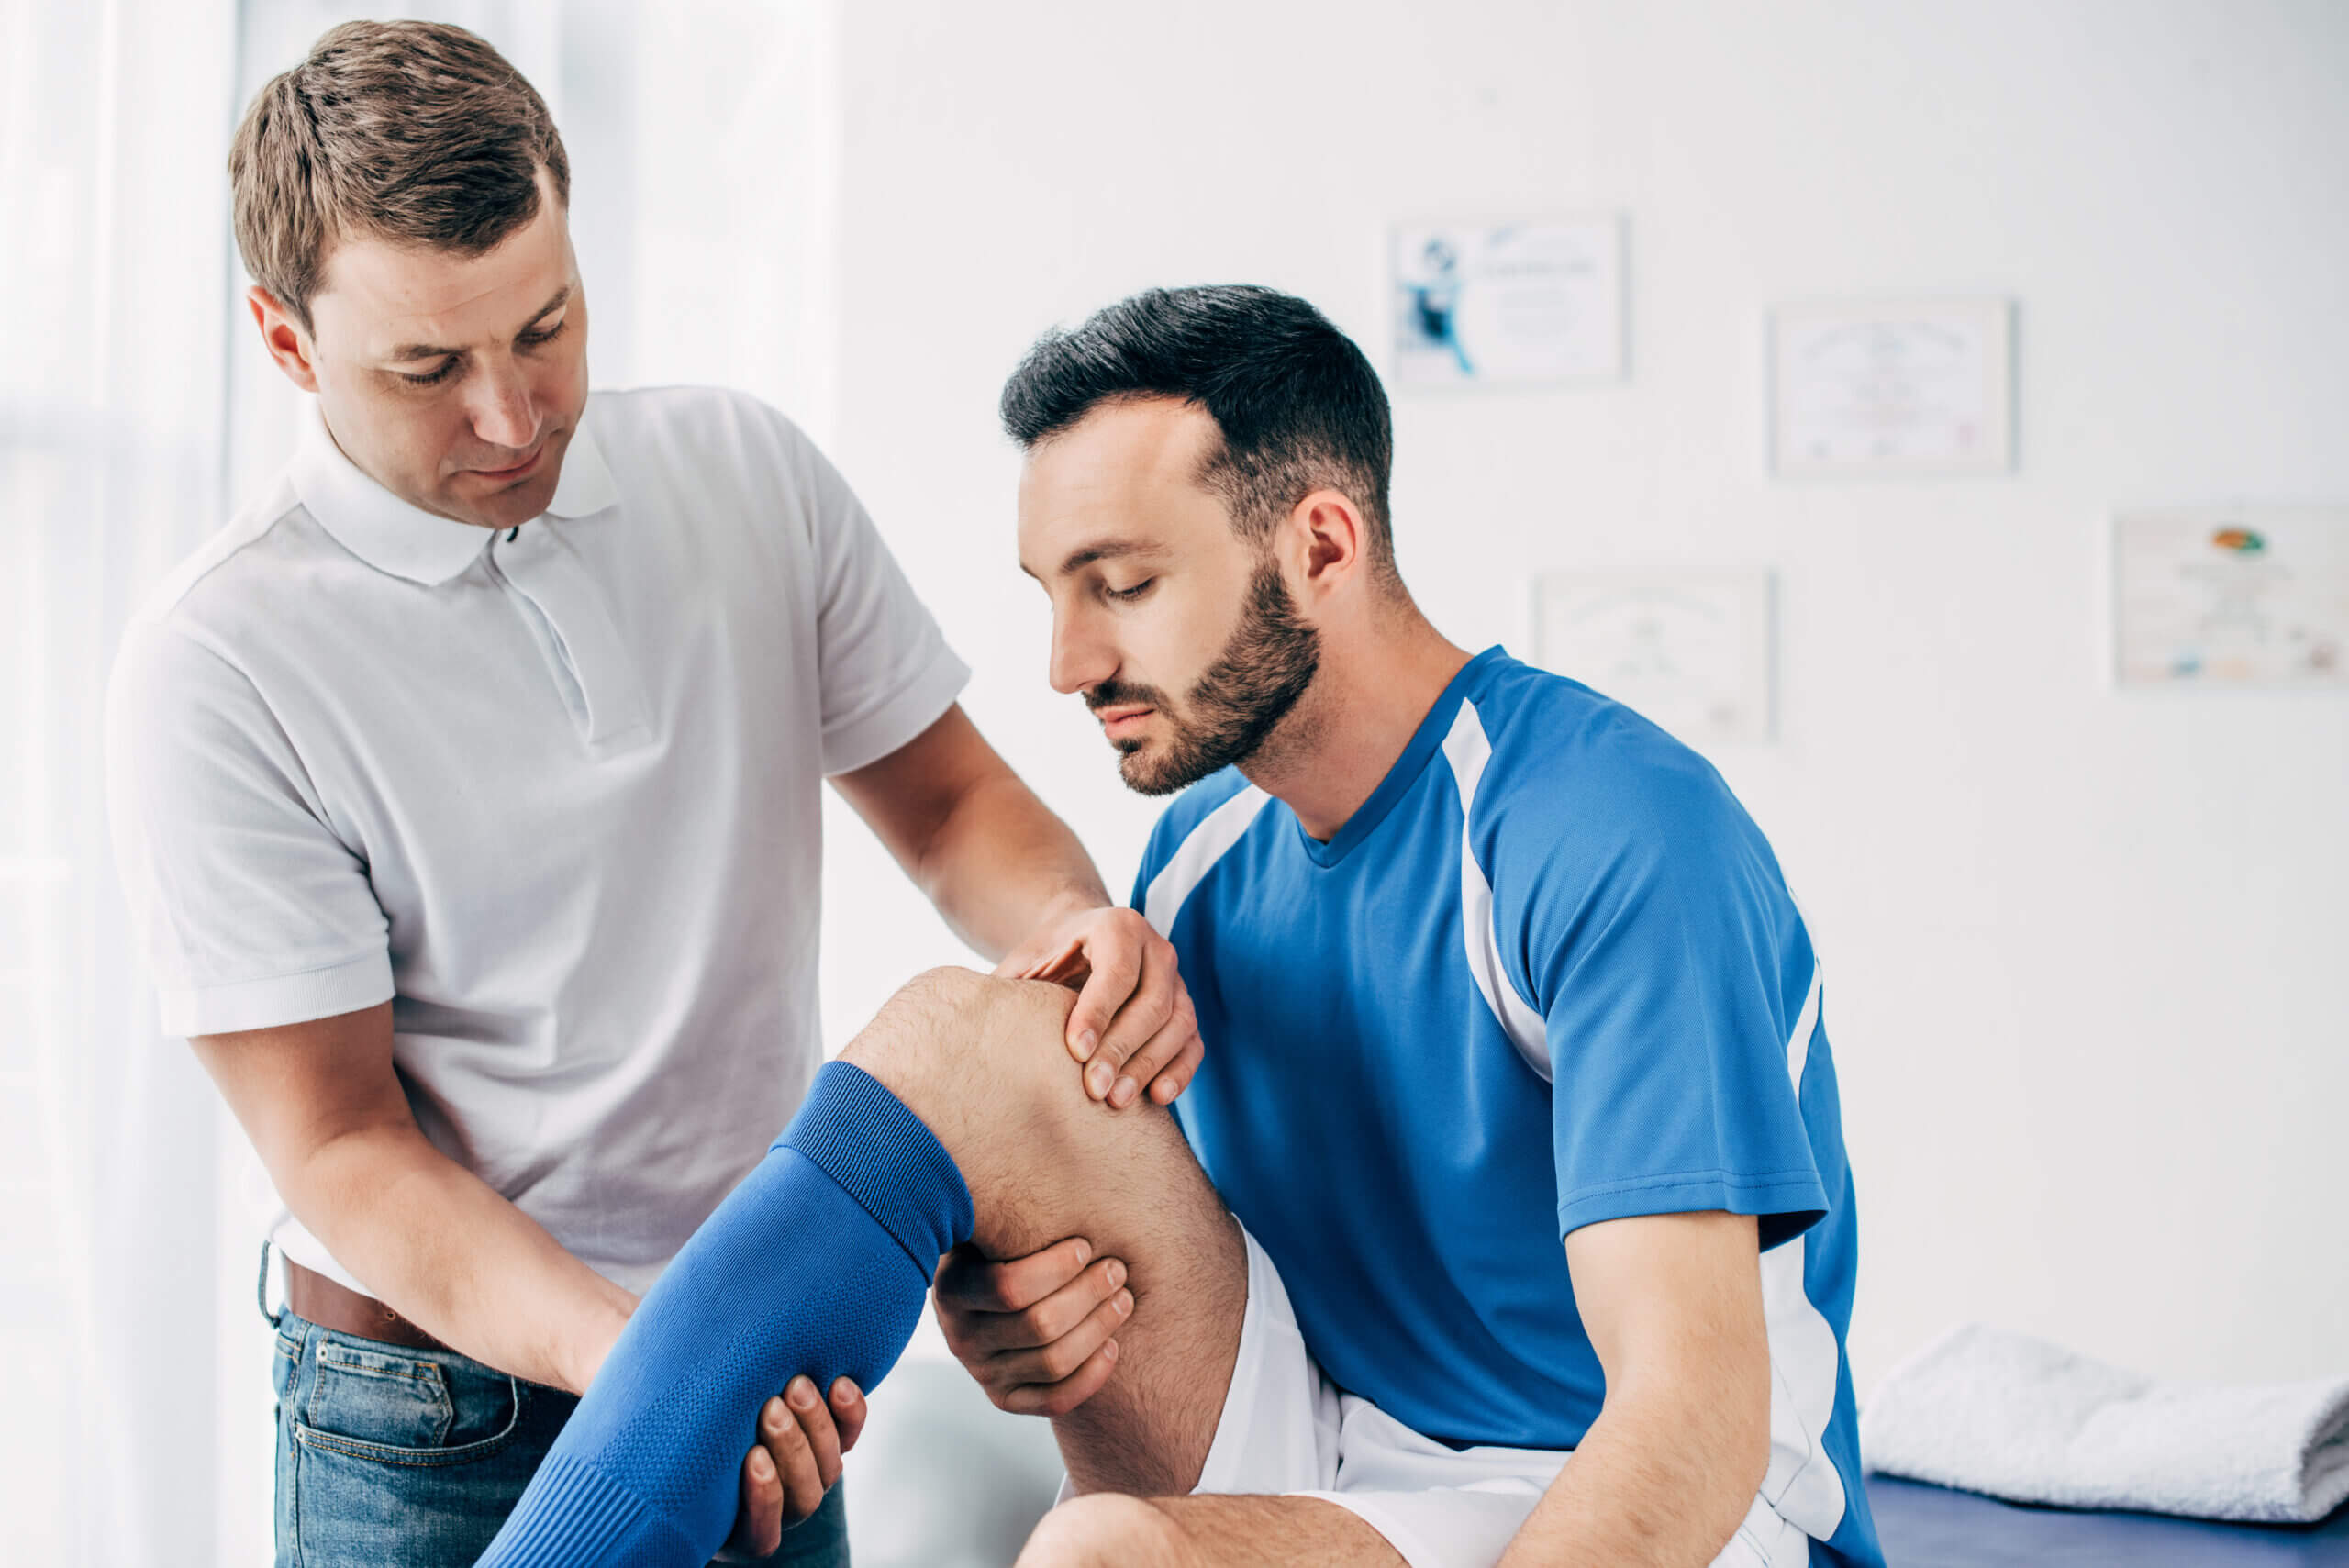 What Types of Jobs Are There In Sports Medicine?